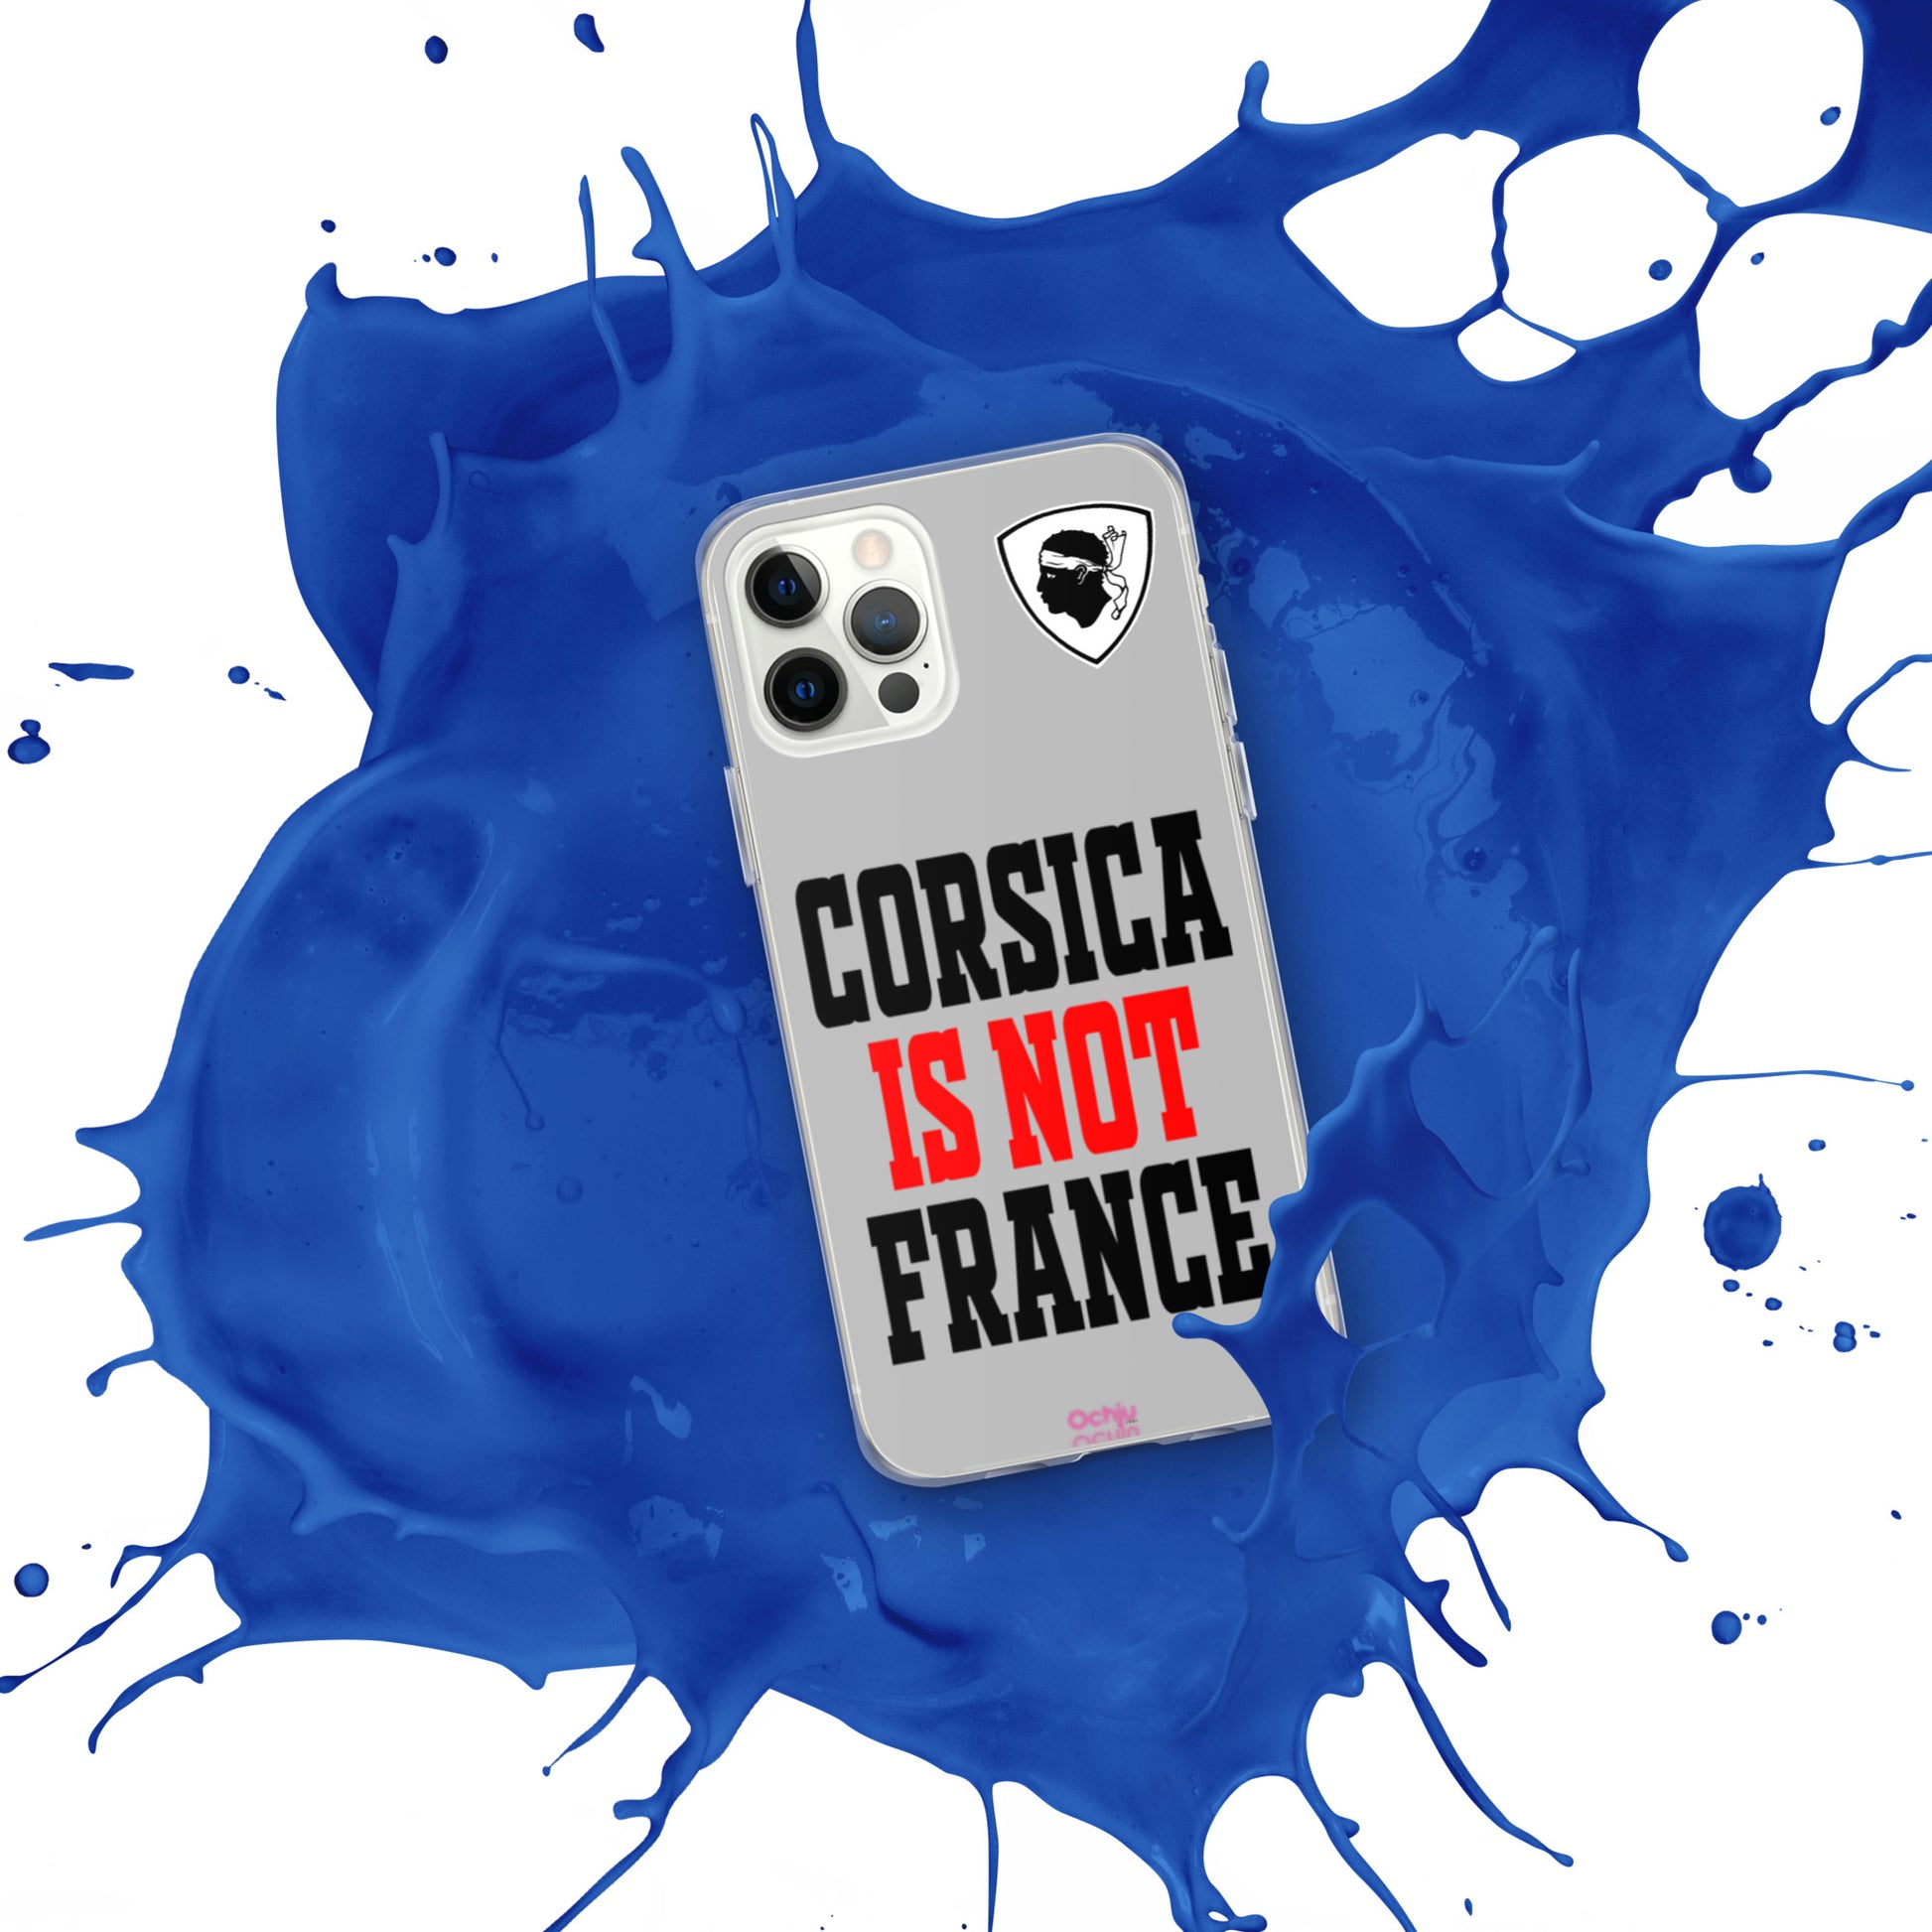 Coque pour iPhone Corsica is not France - Ochju Ochju iPhone 12 Pro Ochju Coque pour iPhone Corsica is not France